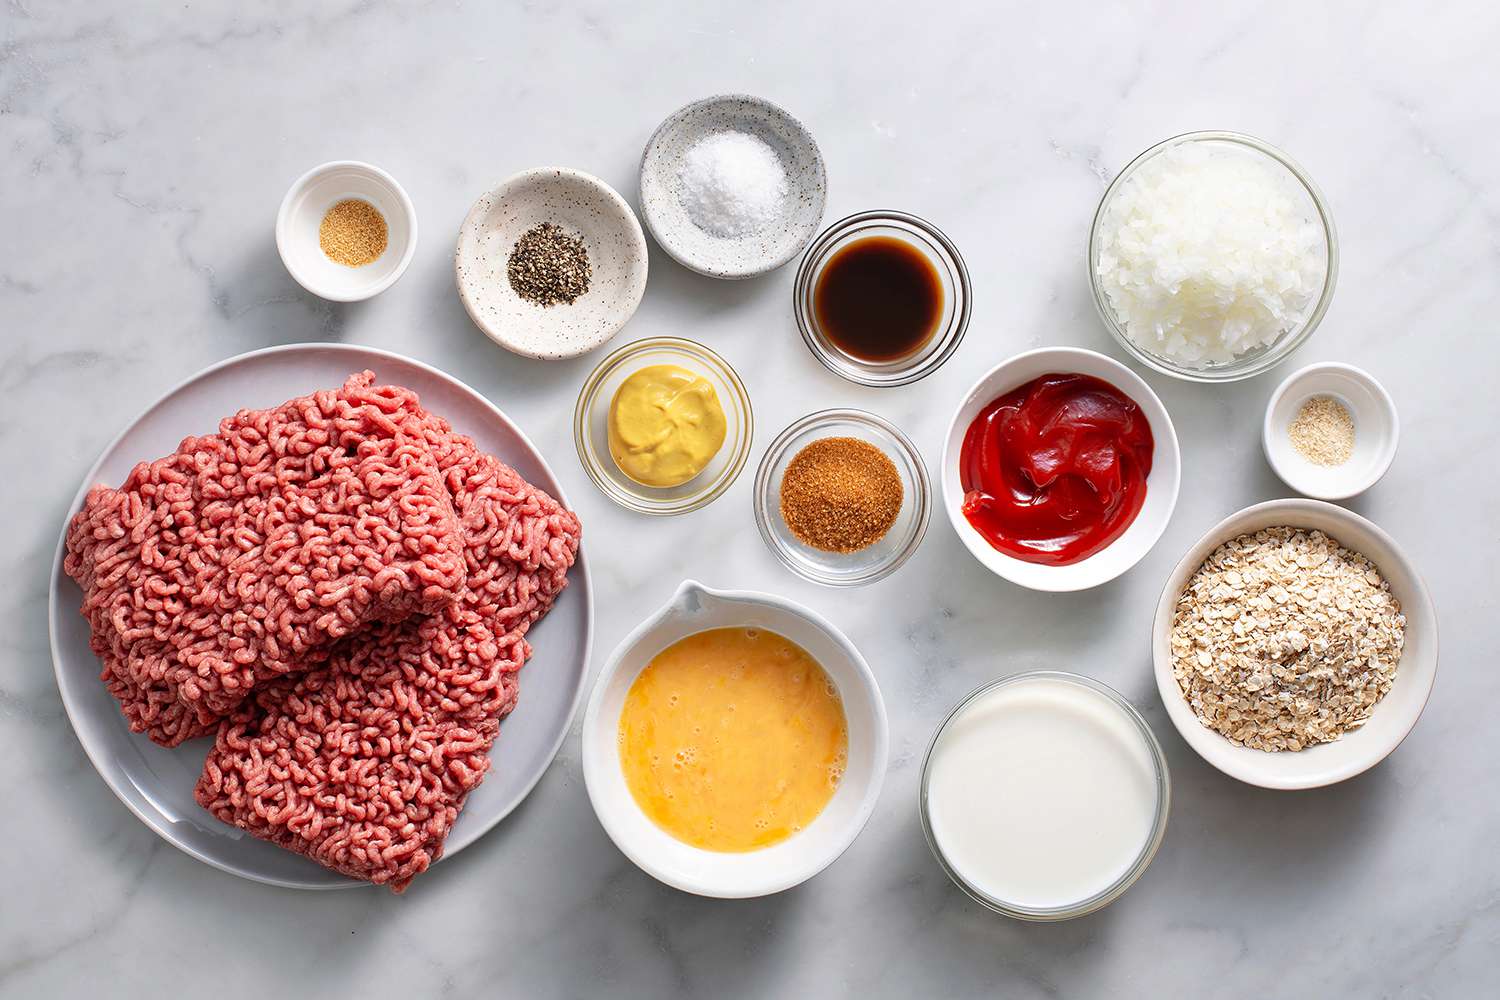 Ingredients for classic meatloaf with oatmeal recipe gathered